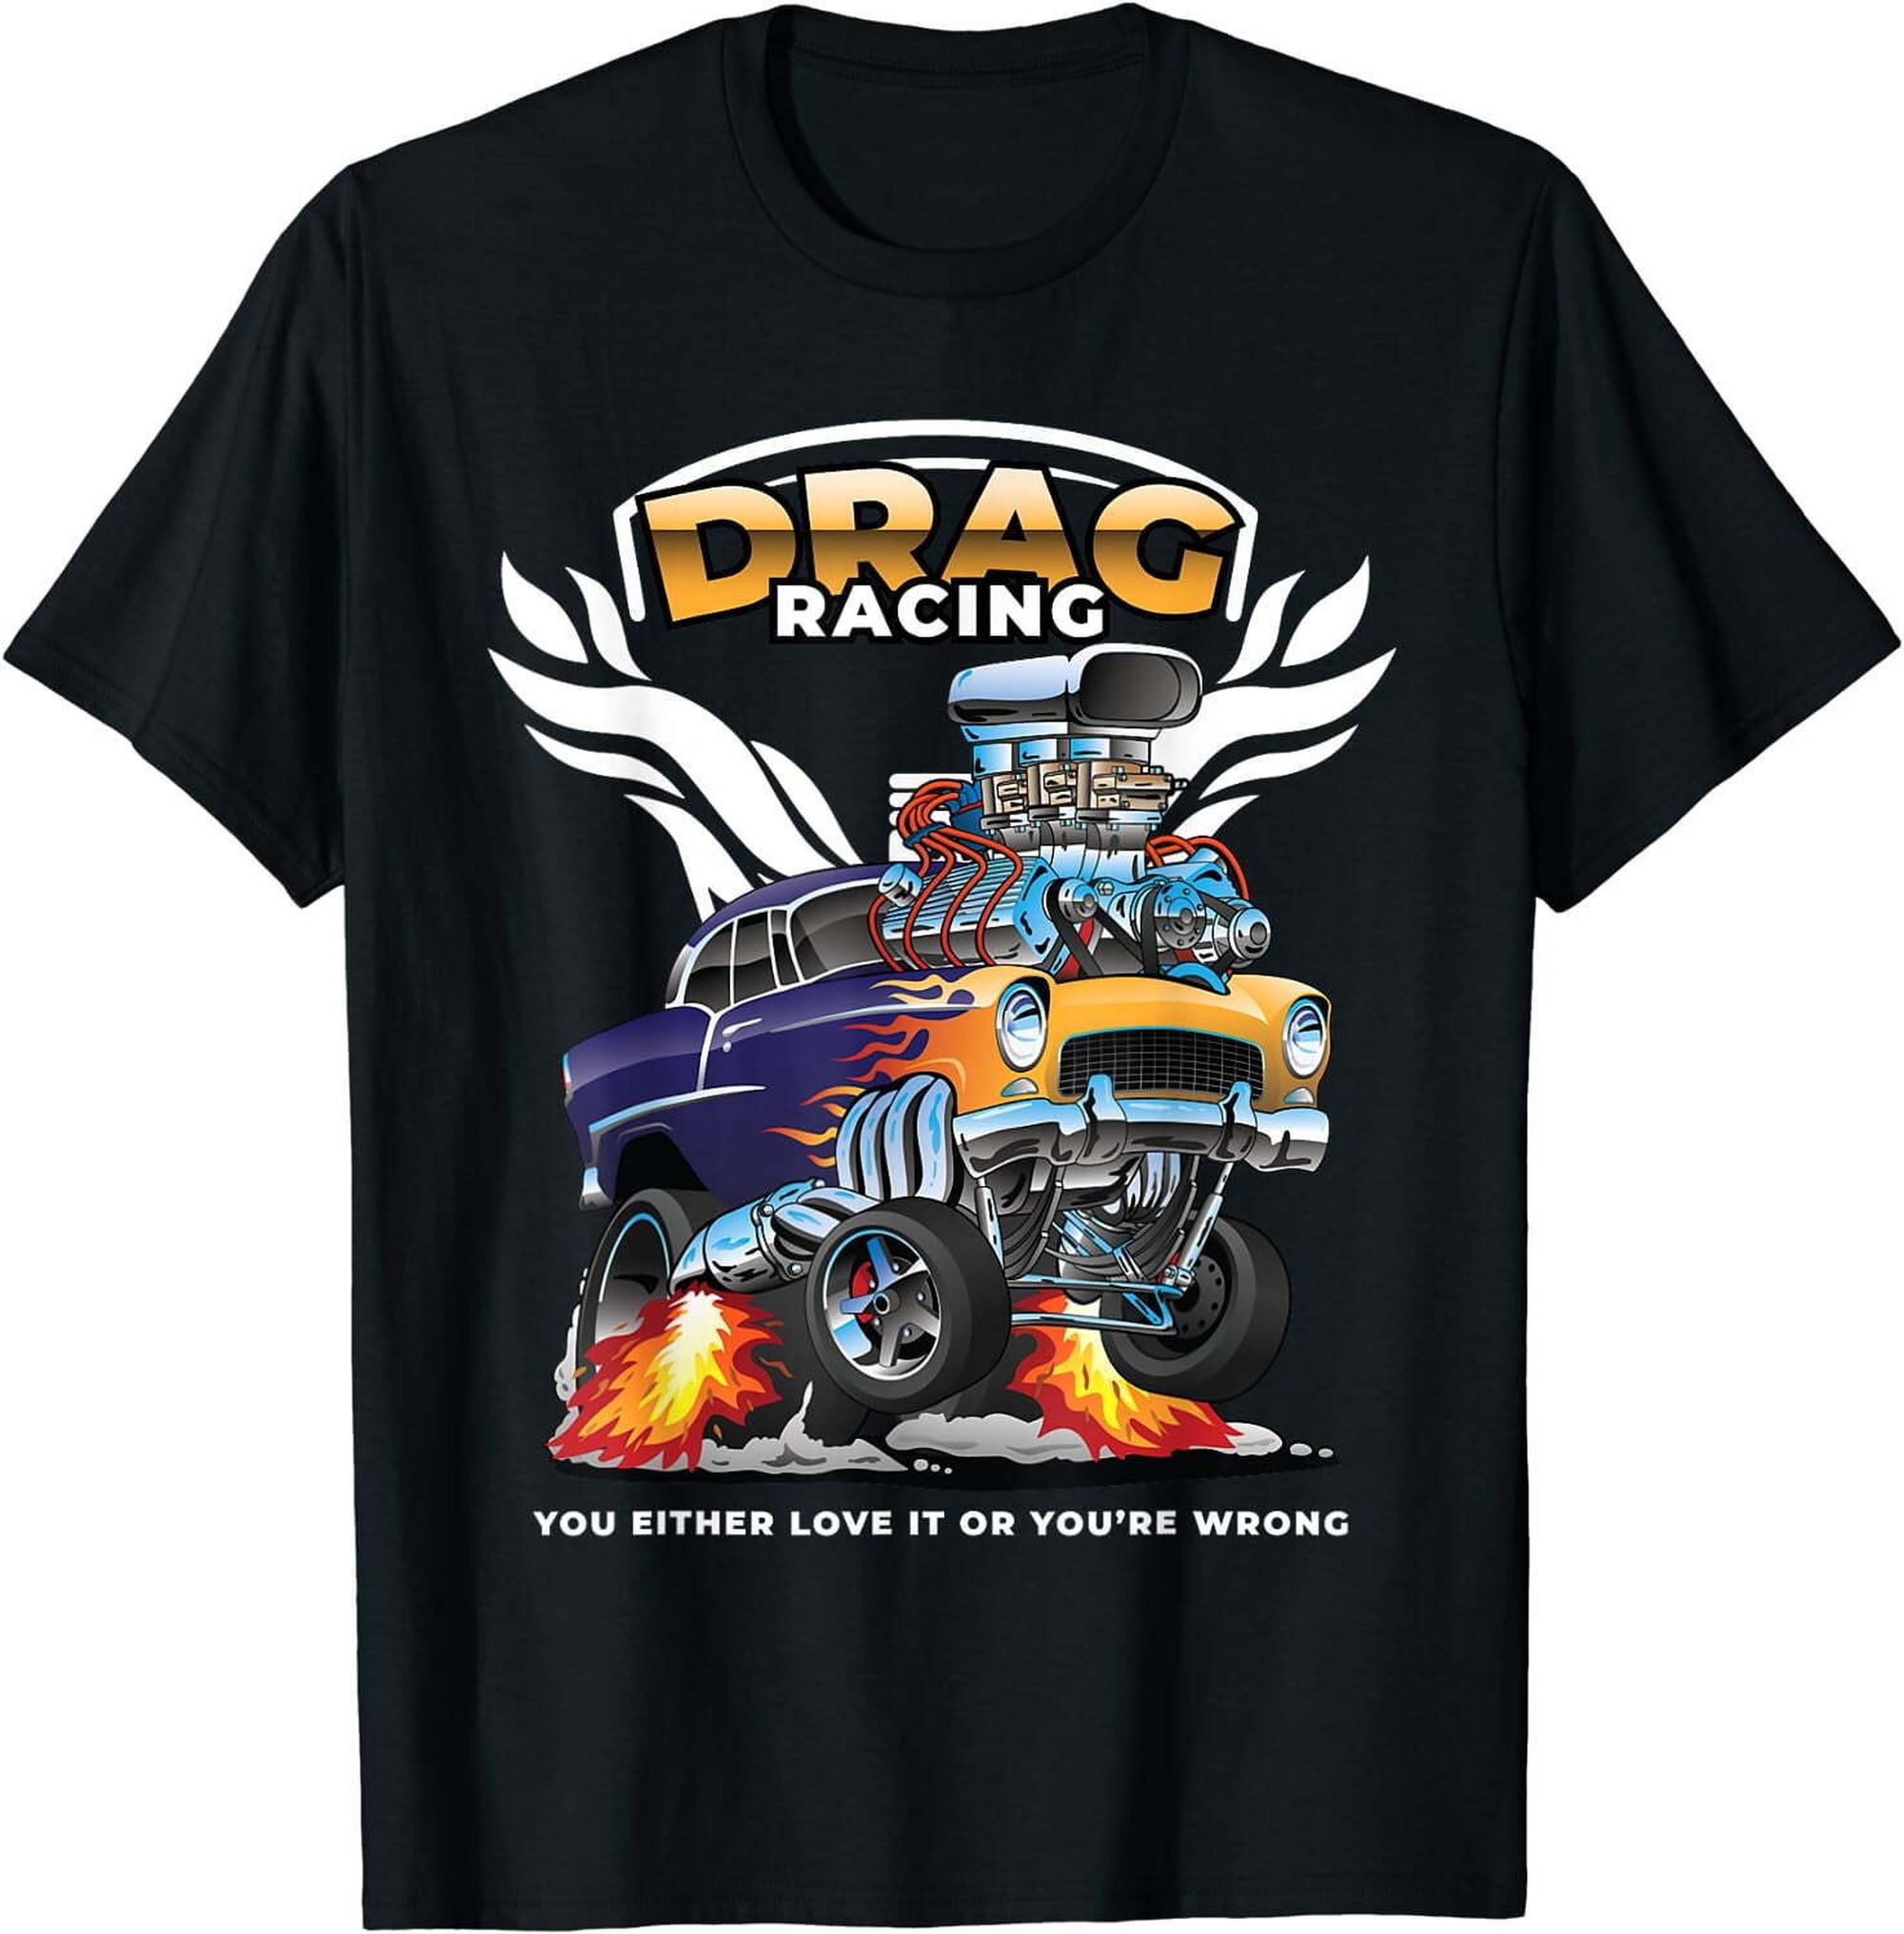 Get Ready to Rev Up the Fun with Our Hilarious Drag Racing Shirt for ...